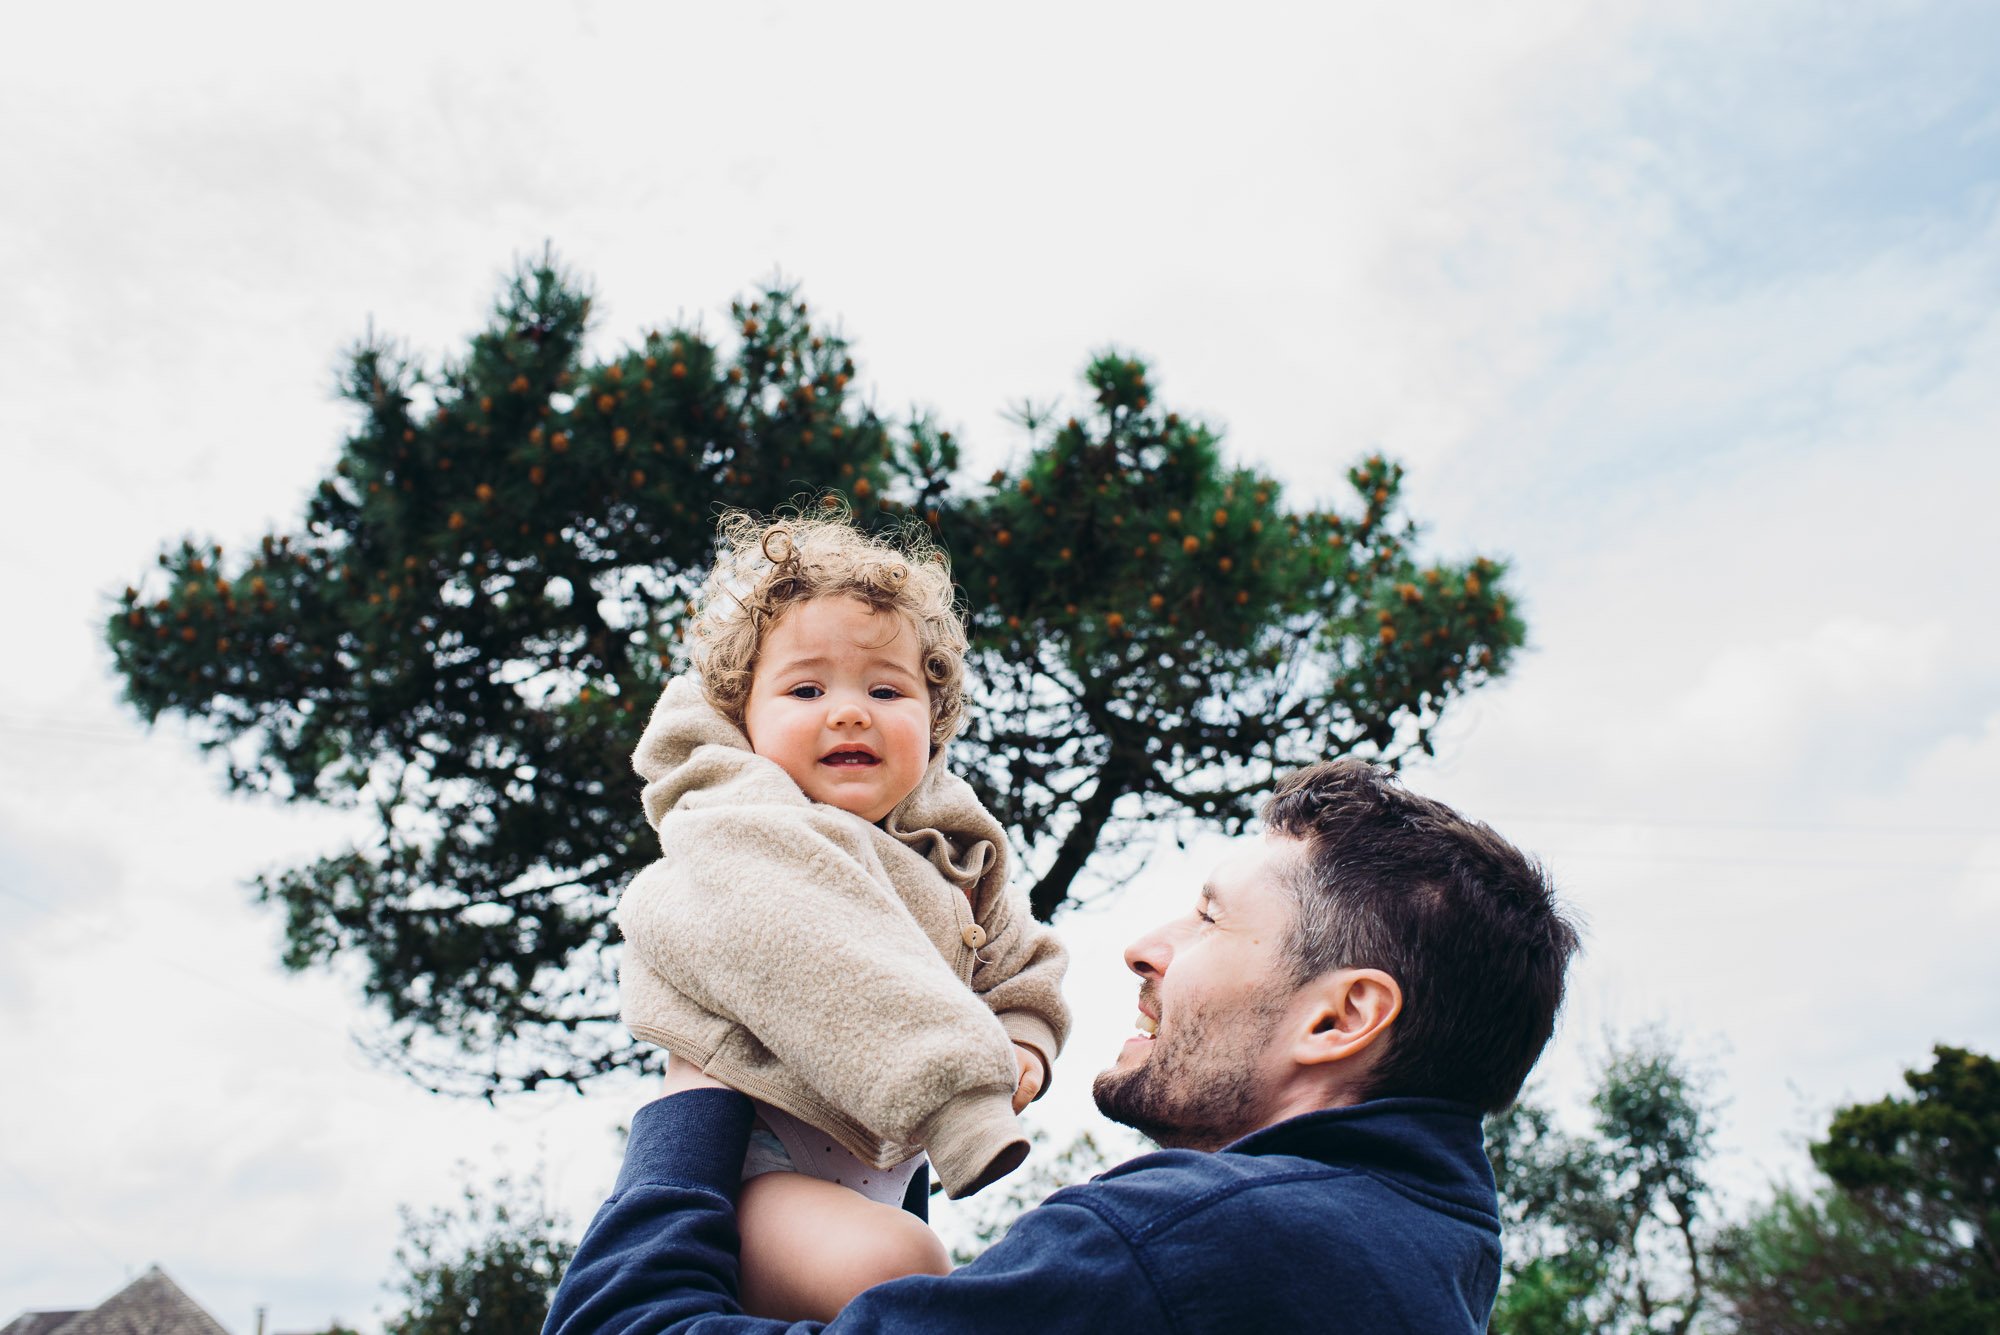 dad-daughter-portrait-outdoors-west-wittering-beach-west-sussex-family-photography-tree-in-background.jpg